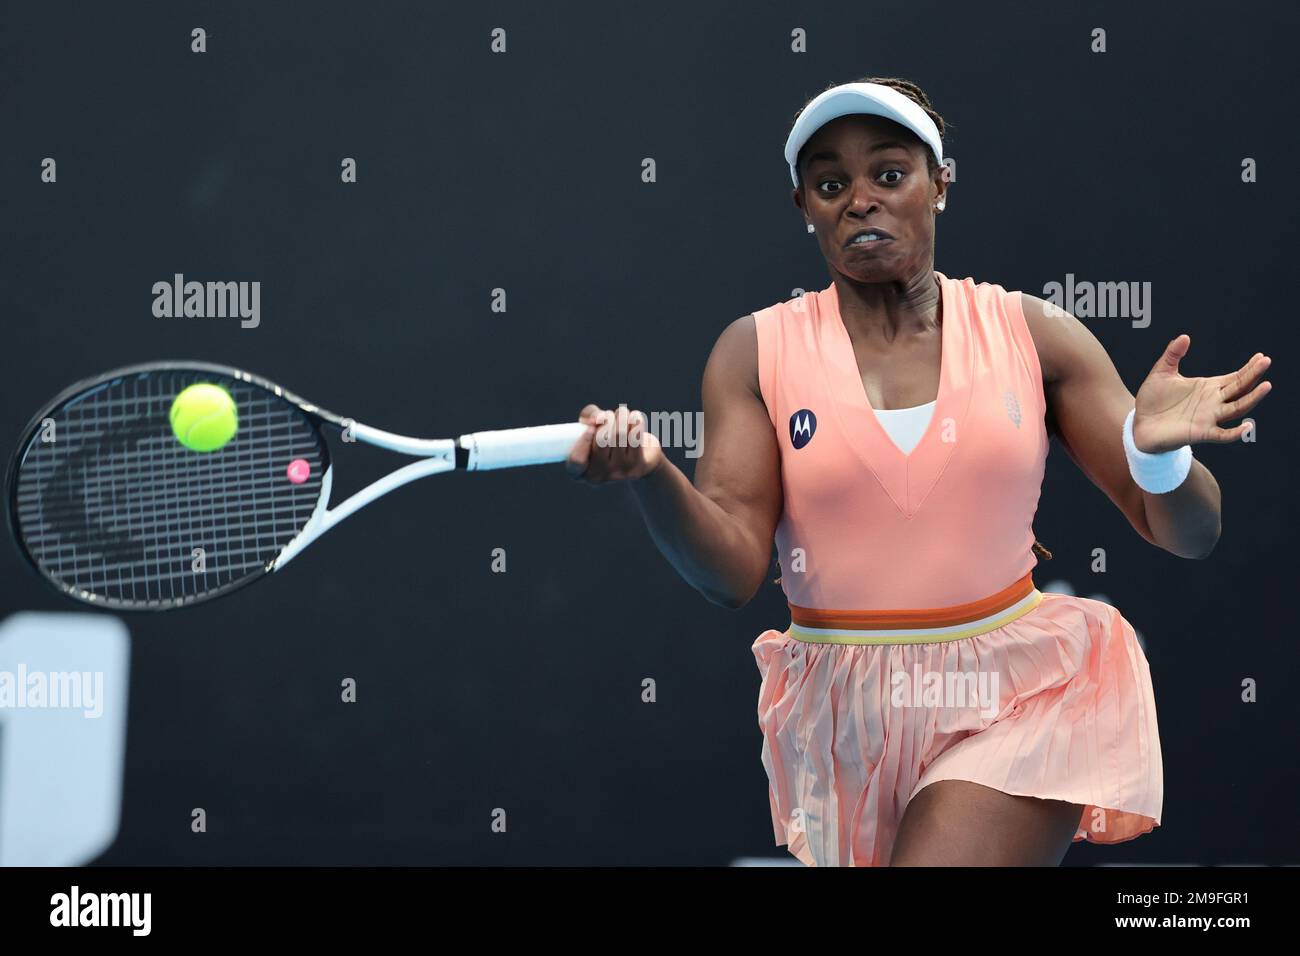 Melbourne, Australia. 18th Jan, 2023. Sloane Stephens of USA in action  during round 2 match between Sloane Stephens of USA and Anastasia Potapova  Day 3 at the Australian Open Tennis 2023 at